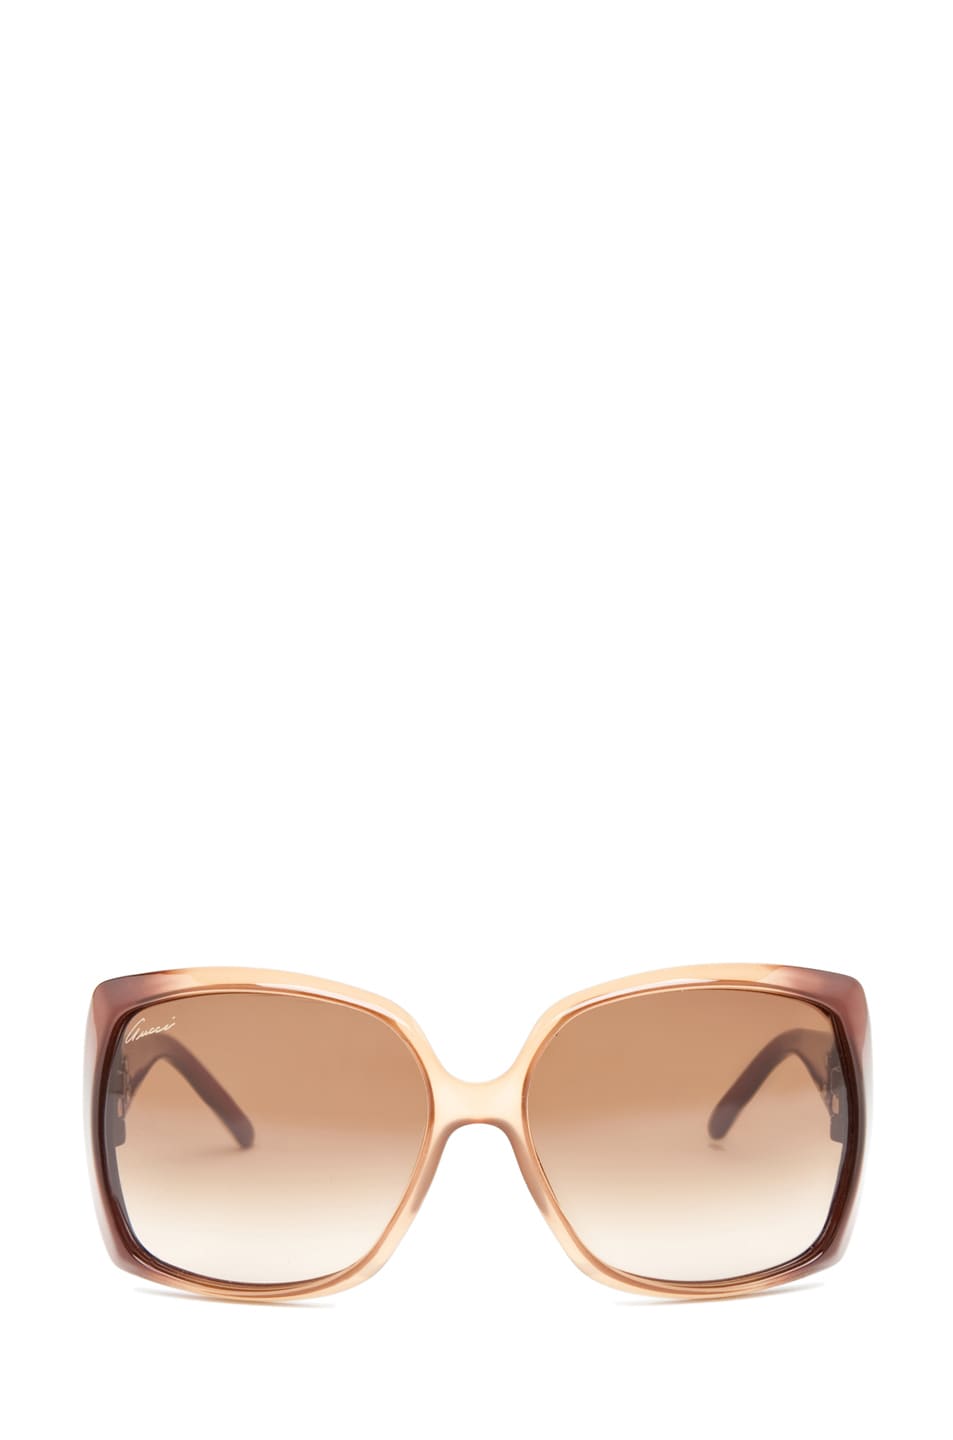 Image 1 of Gucci 3503 Sunglasses in Brown Beige